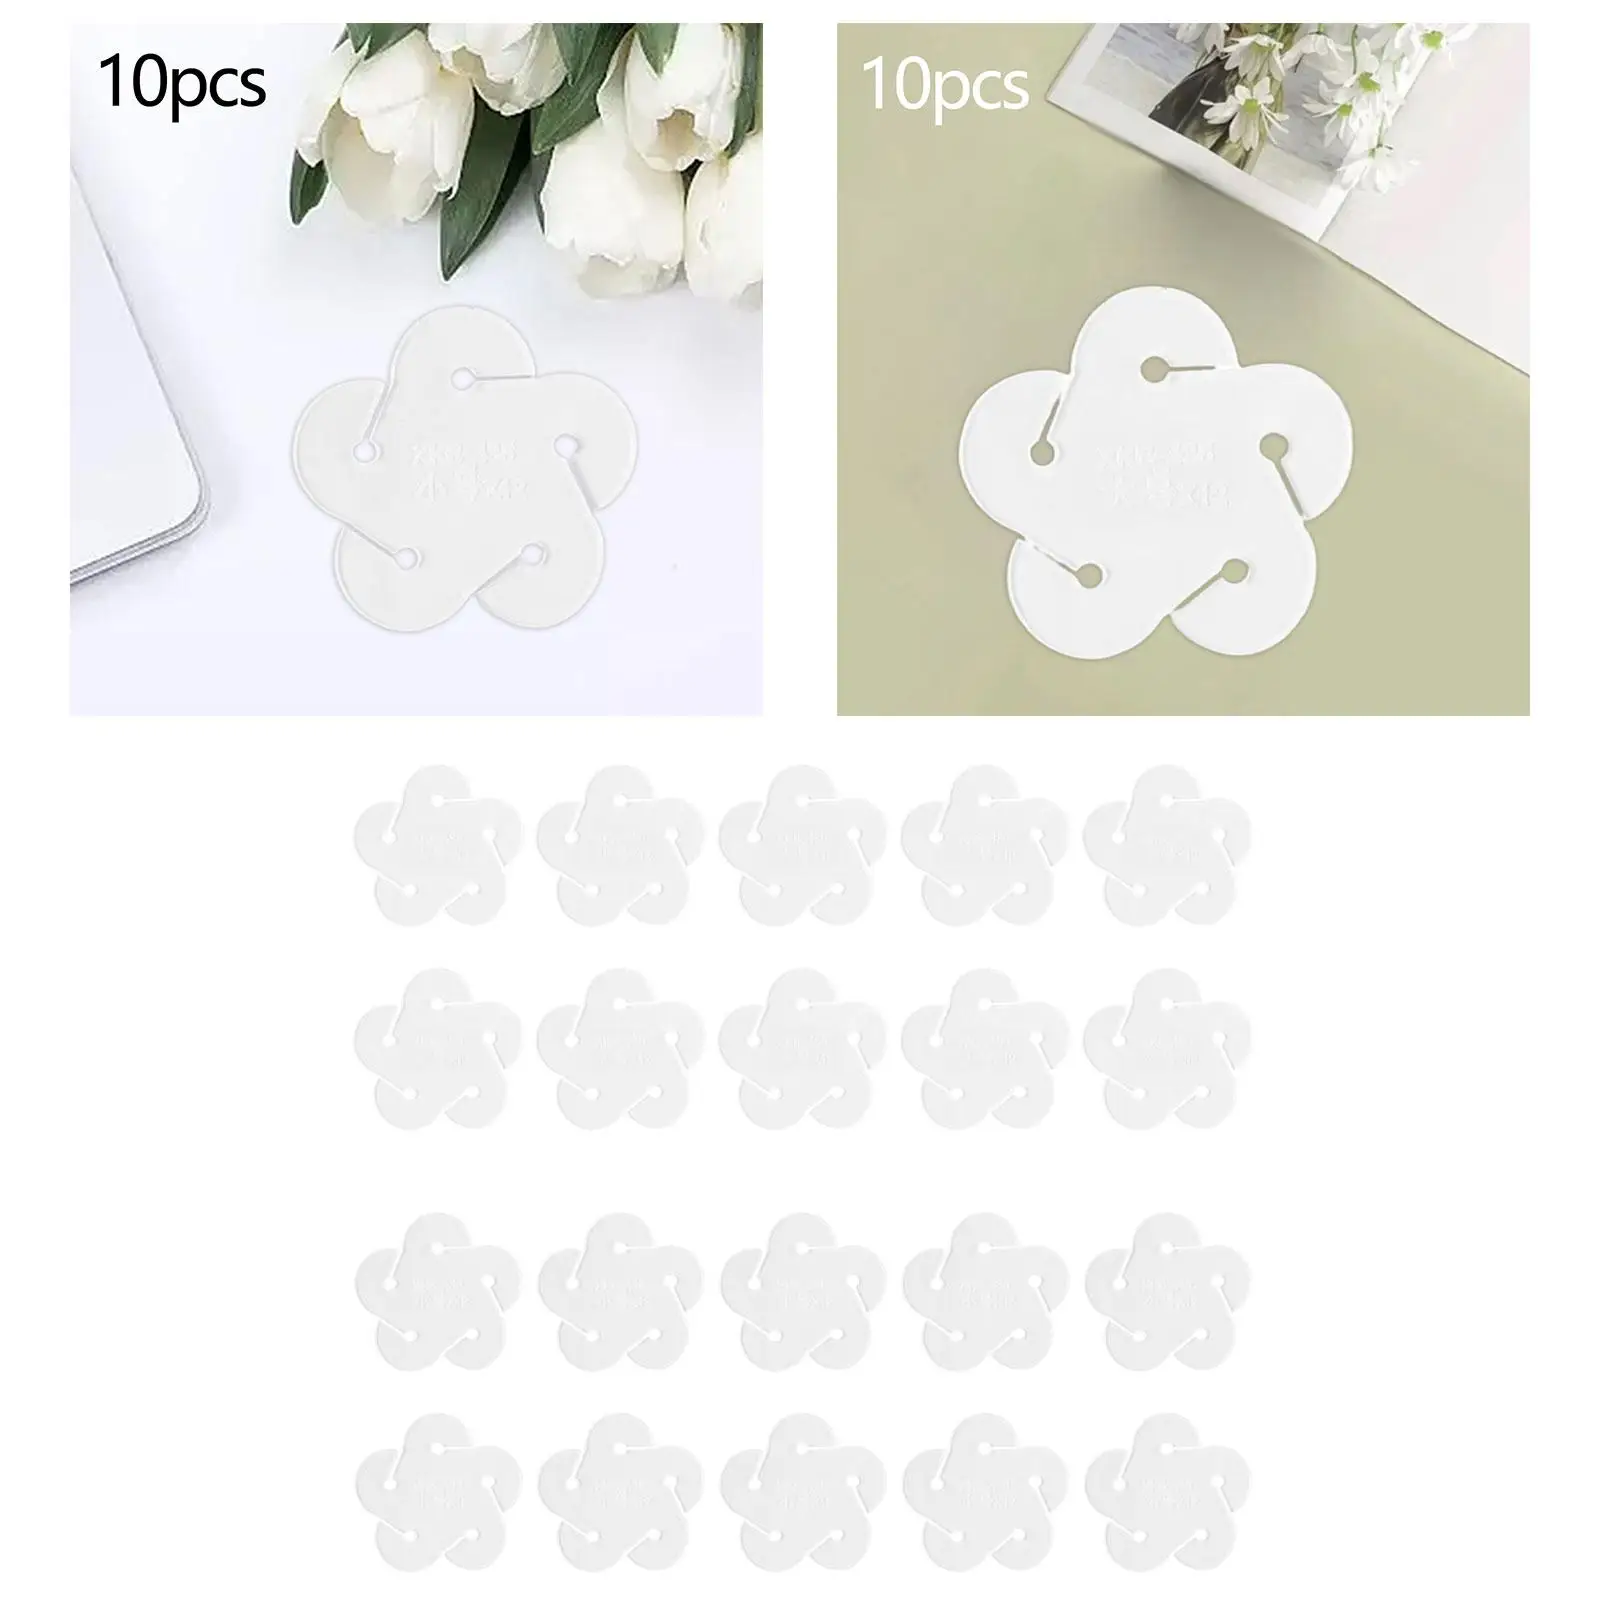 10Pcs Key Chain Leather Craft Pattern Stencil Model Pattern Stencil Acrylic Template for Marking